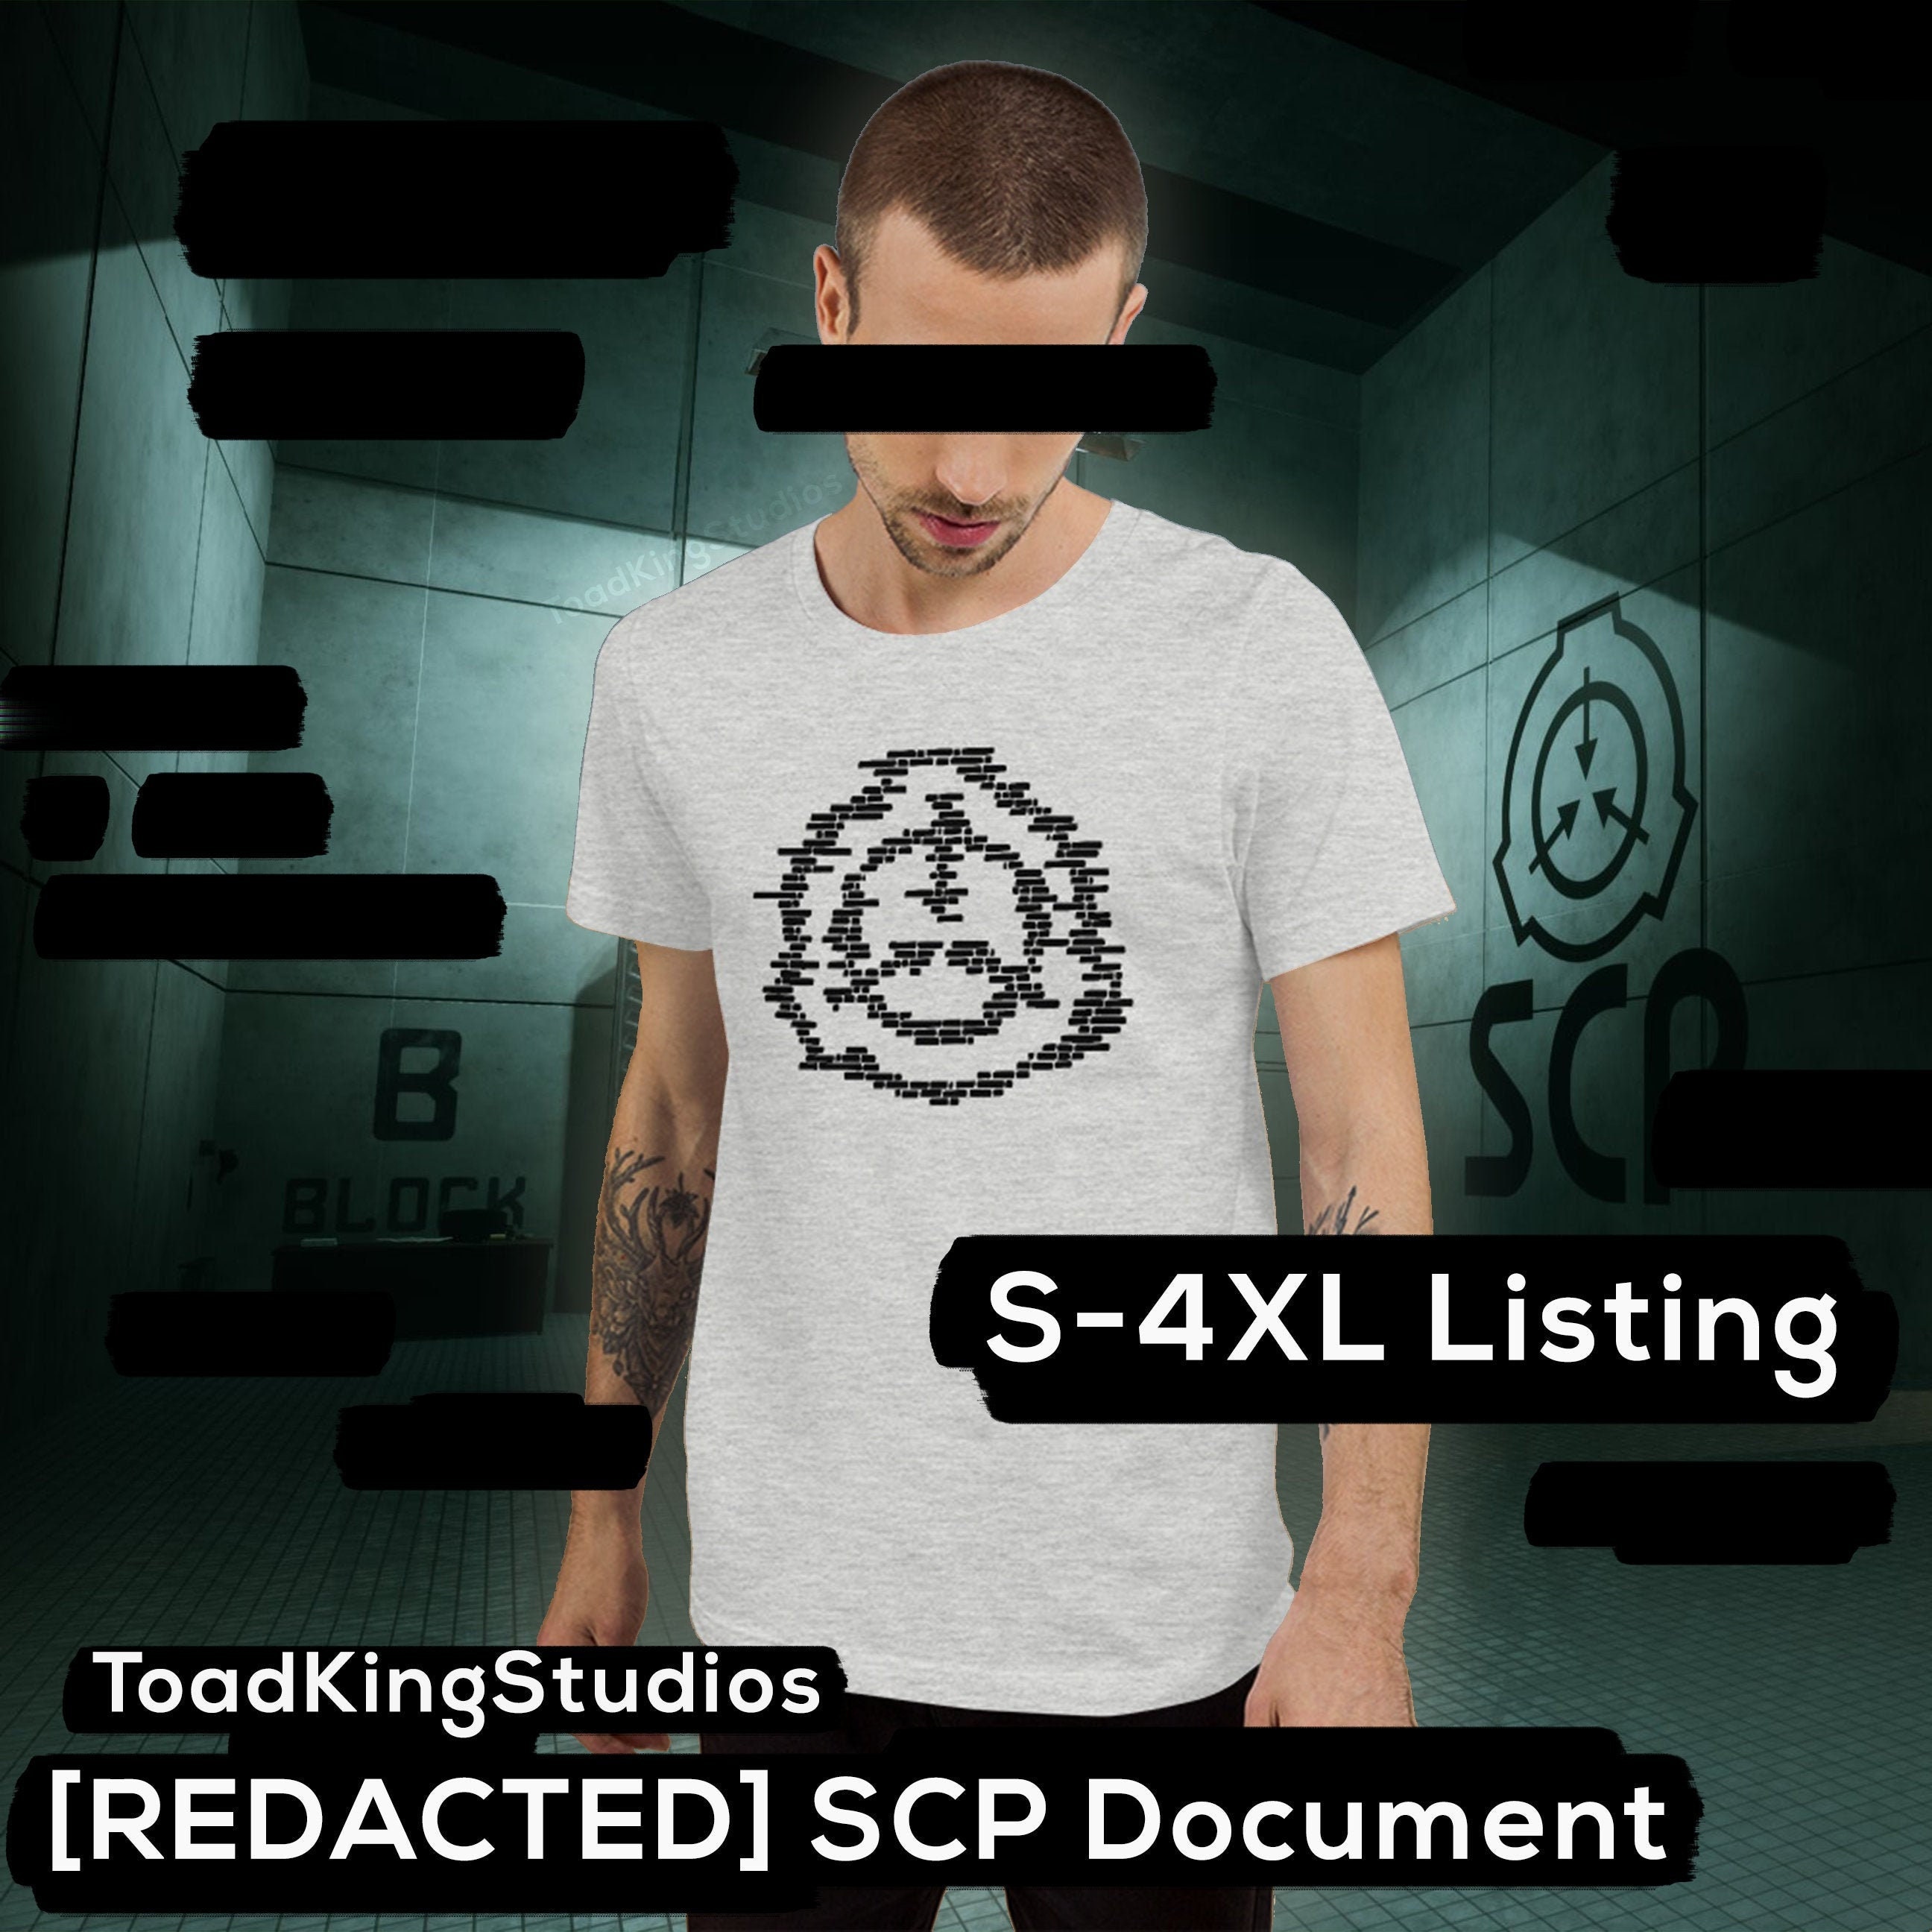 scp 173  Scp, Funny images, Secret organizations